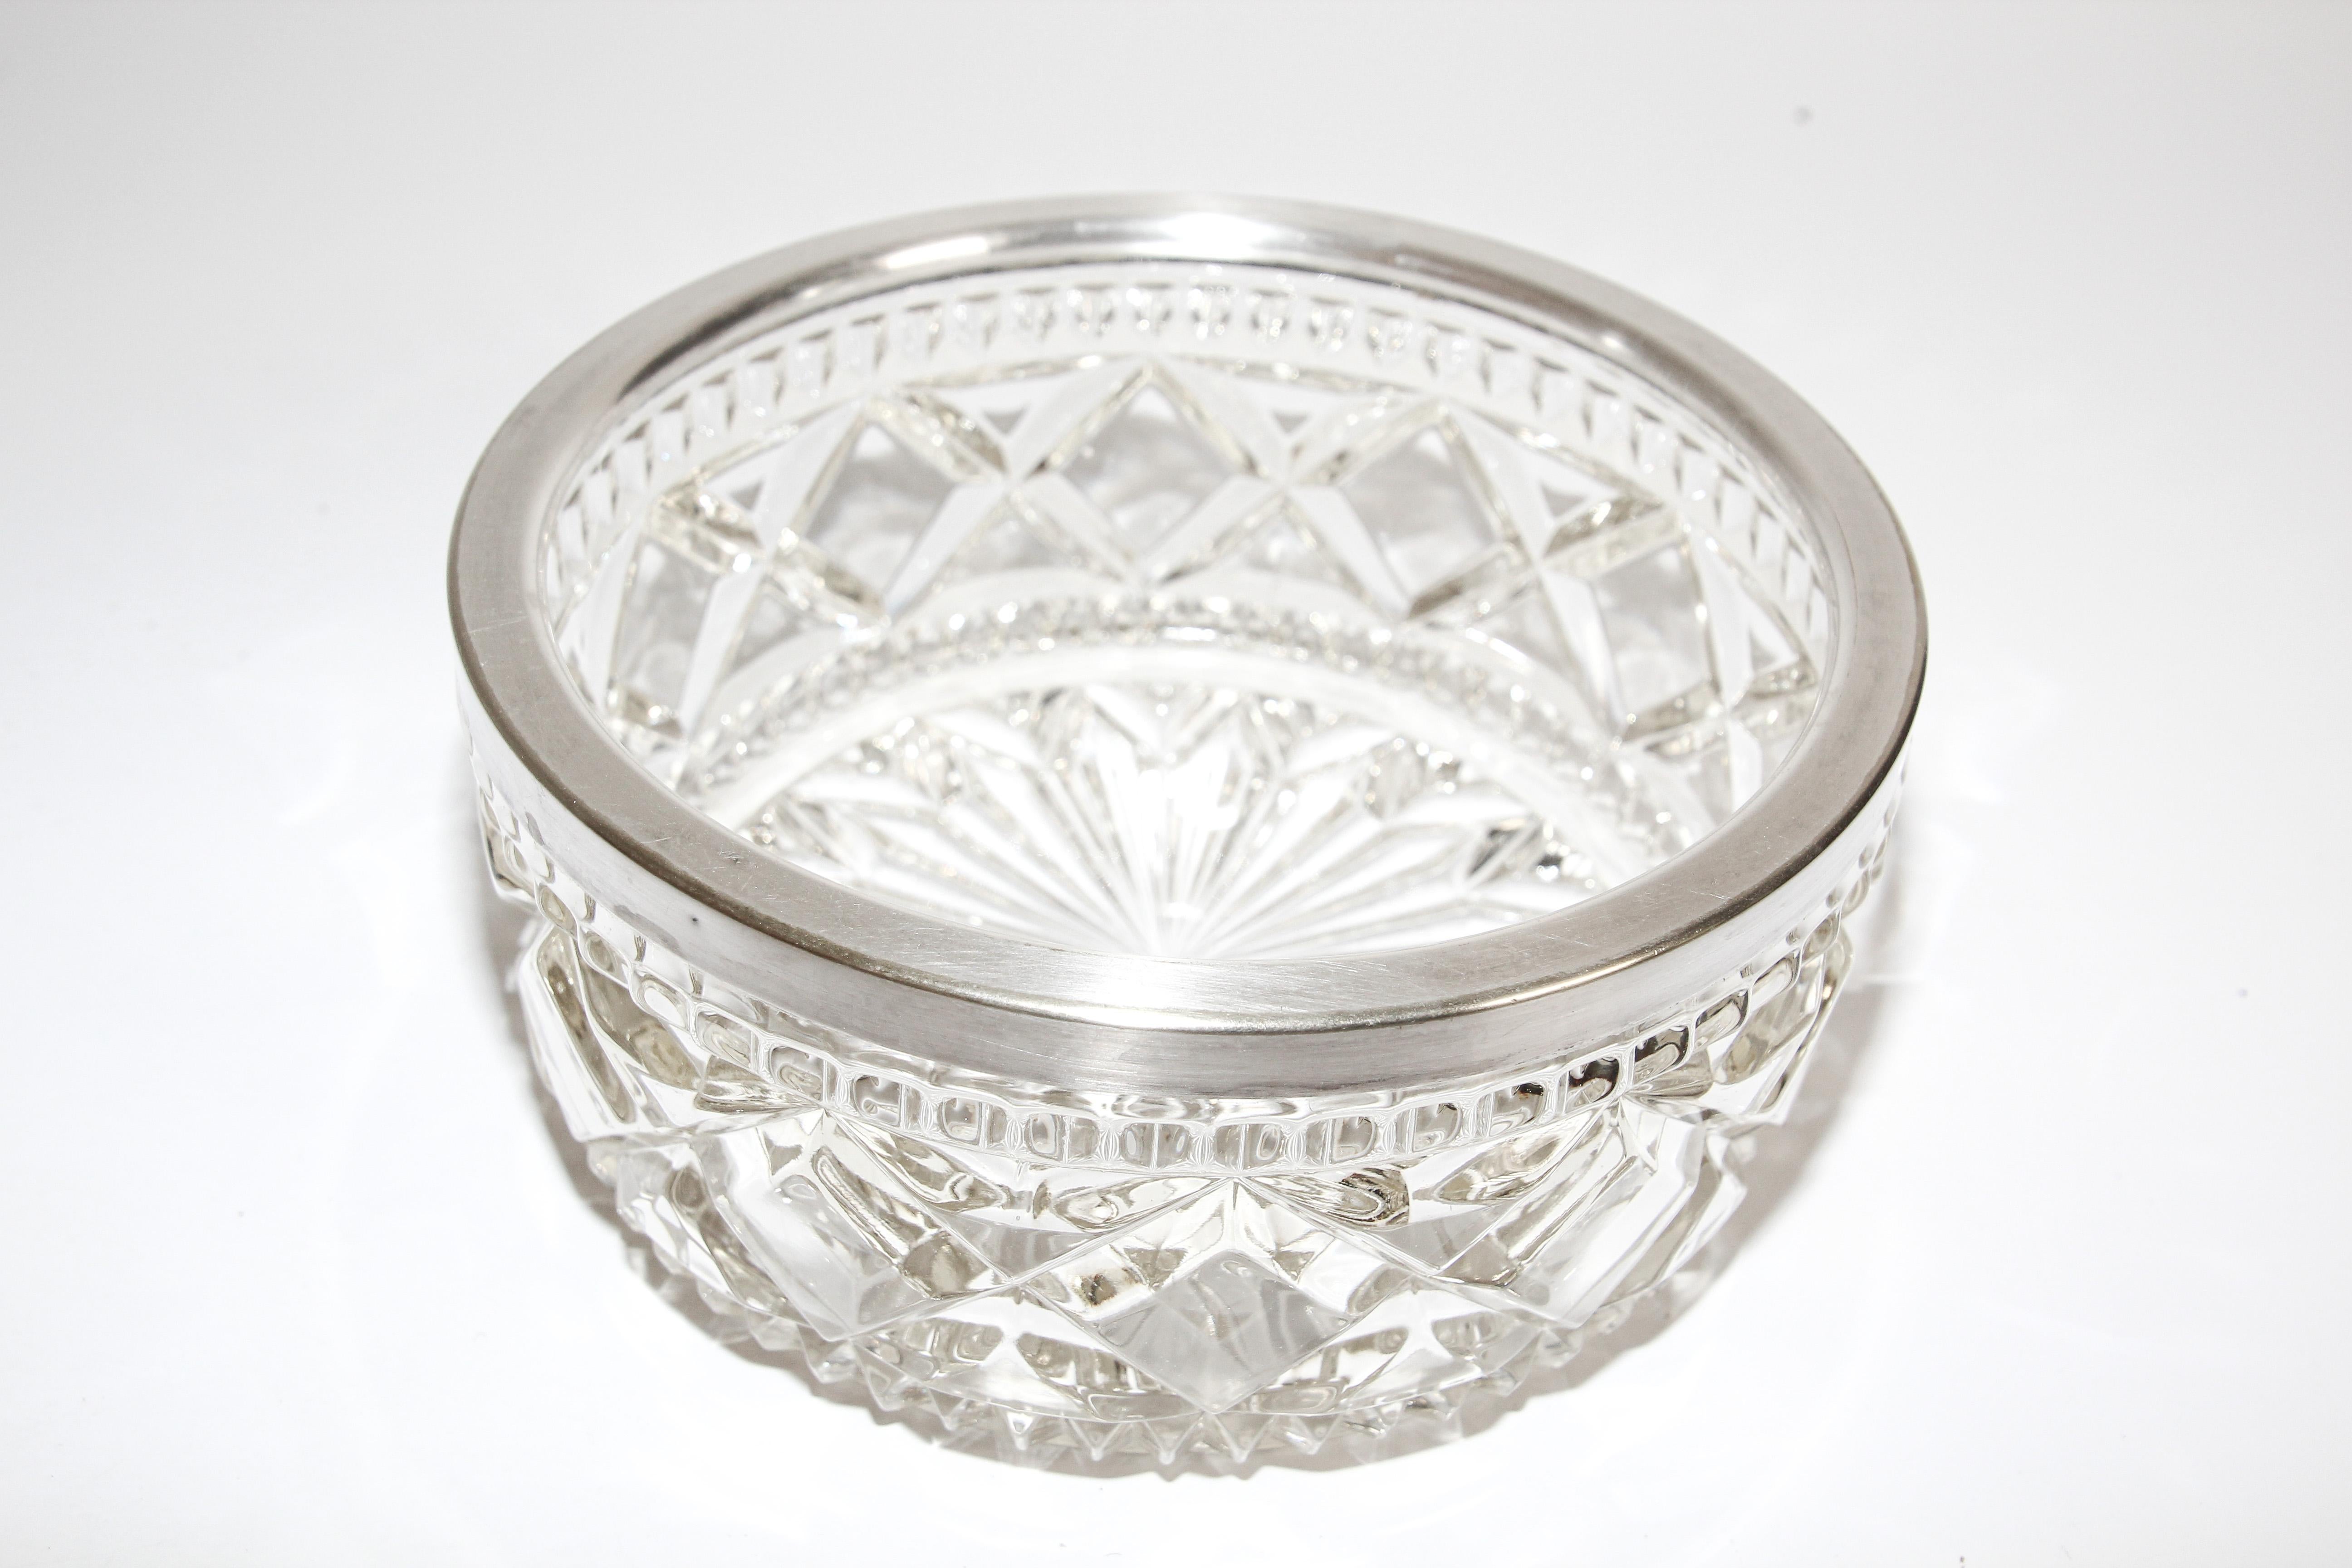 Vintage large heavy crystal bowl with silver plated rim produced by Raimond, England. 
Incised on the rim “Made in England” (see picture 4), the pattern features a beautiful cutout starburst pattern. The bottom of the bowl is gorgeous and offers